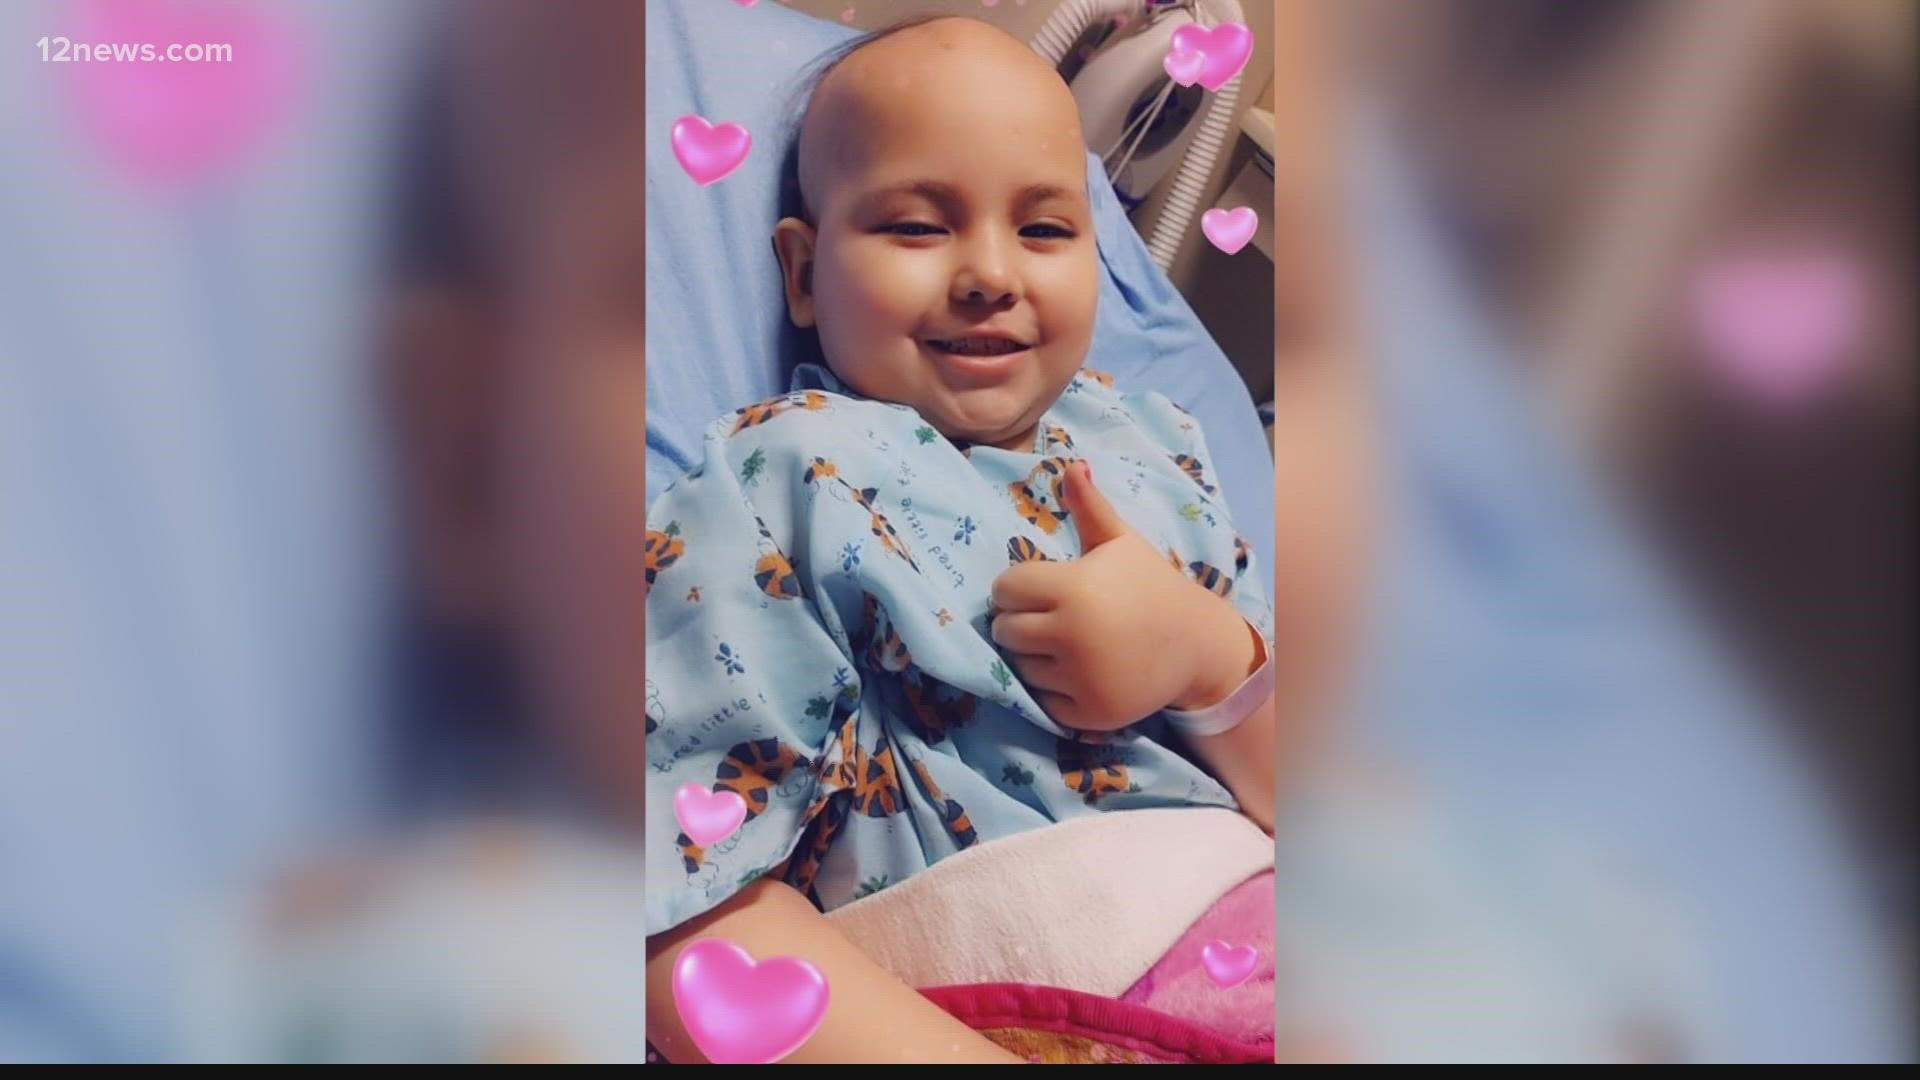 Mali Maltos has been suffering from a brain tumor and COVID halted plans for her Make-A-Wish Disney Cruise. Now, the community is working to get her to Disneyland.